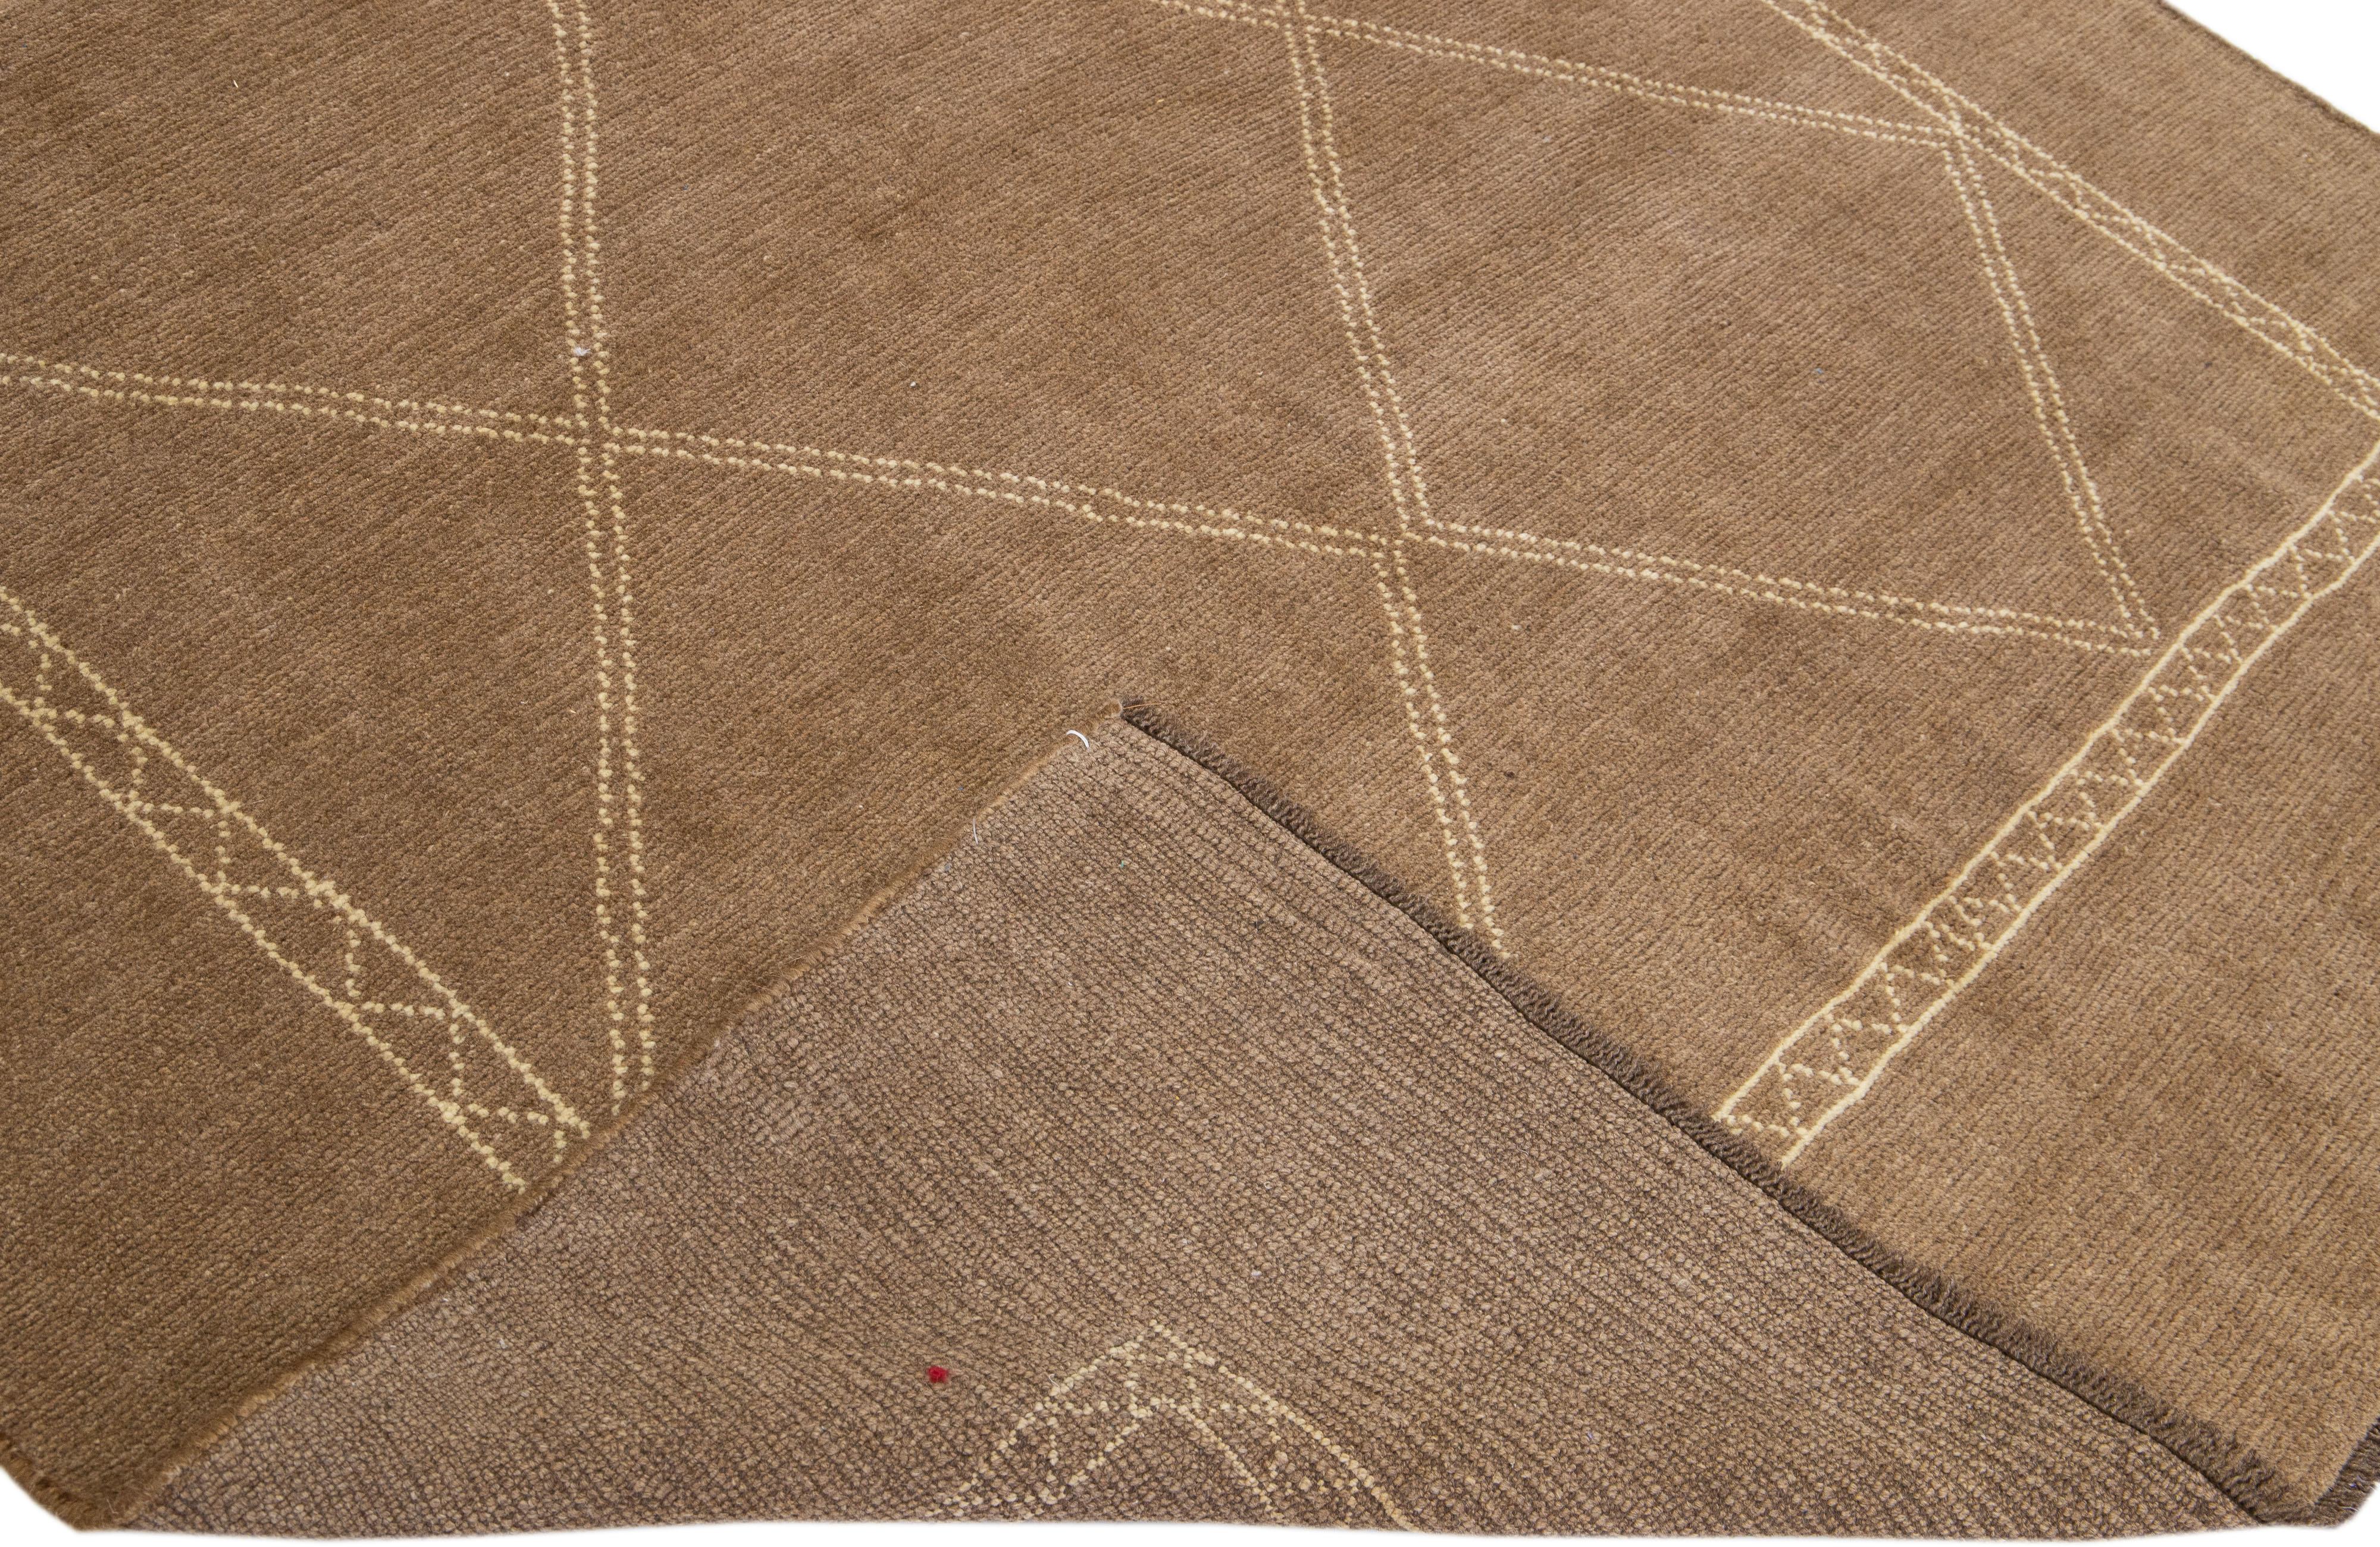 This Beautiful Moroccan-style handmade wool rug makes part of our Northwest collection and features a light brown color field and dark Beige accents in a gorgeous geometric tribal design.

This rug measures: 6'9